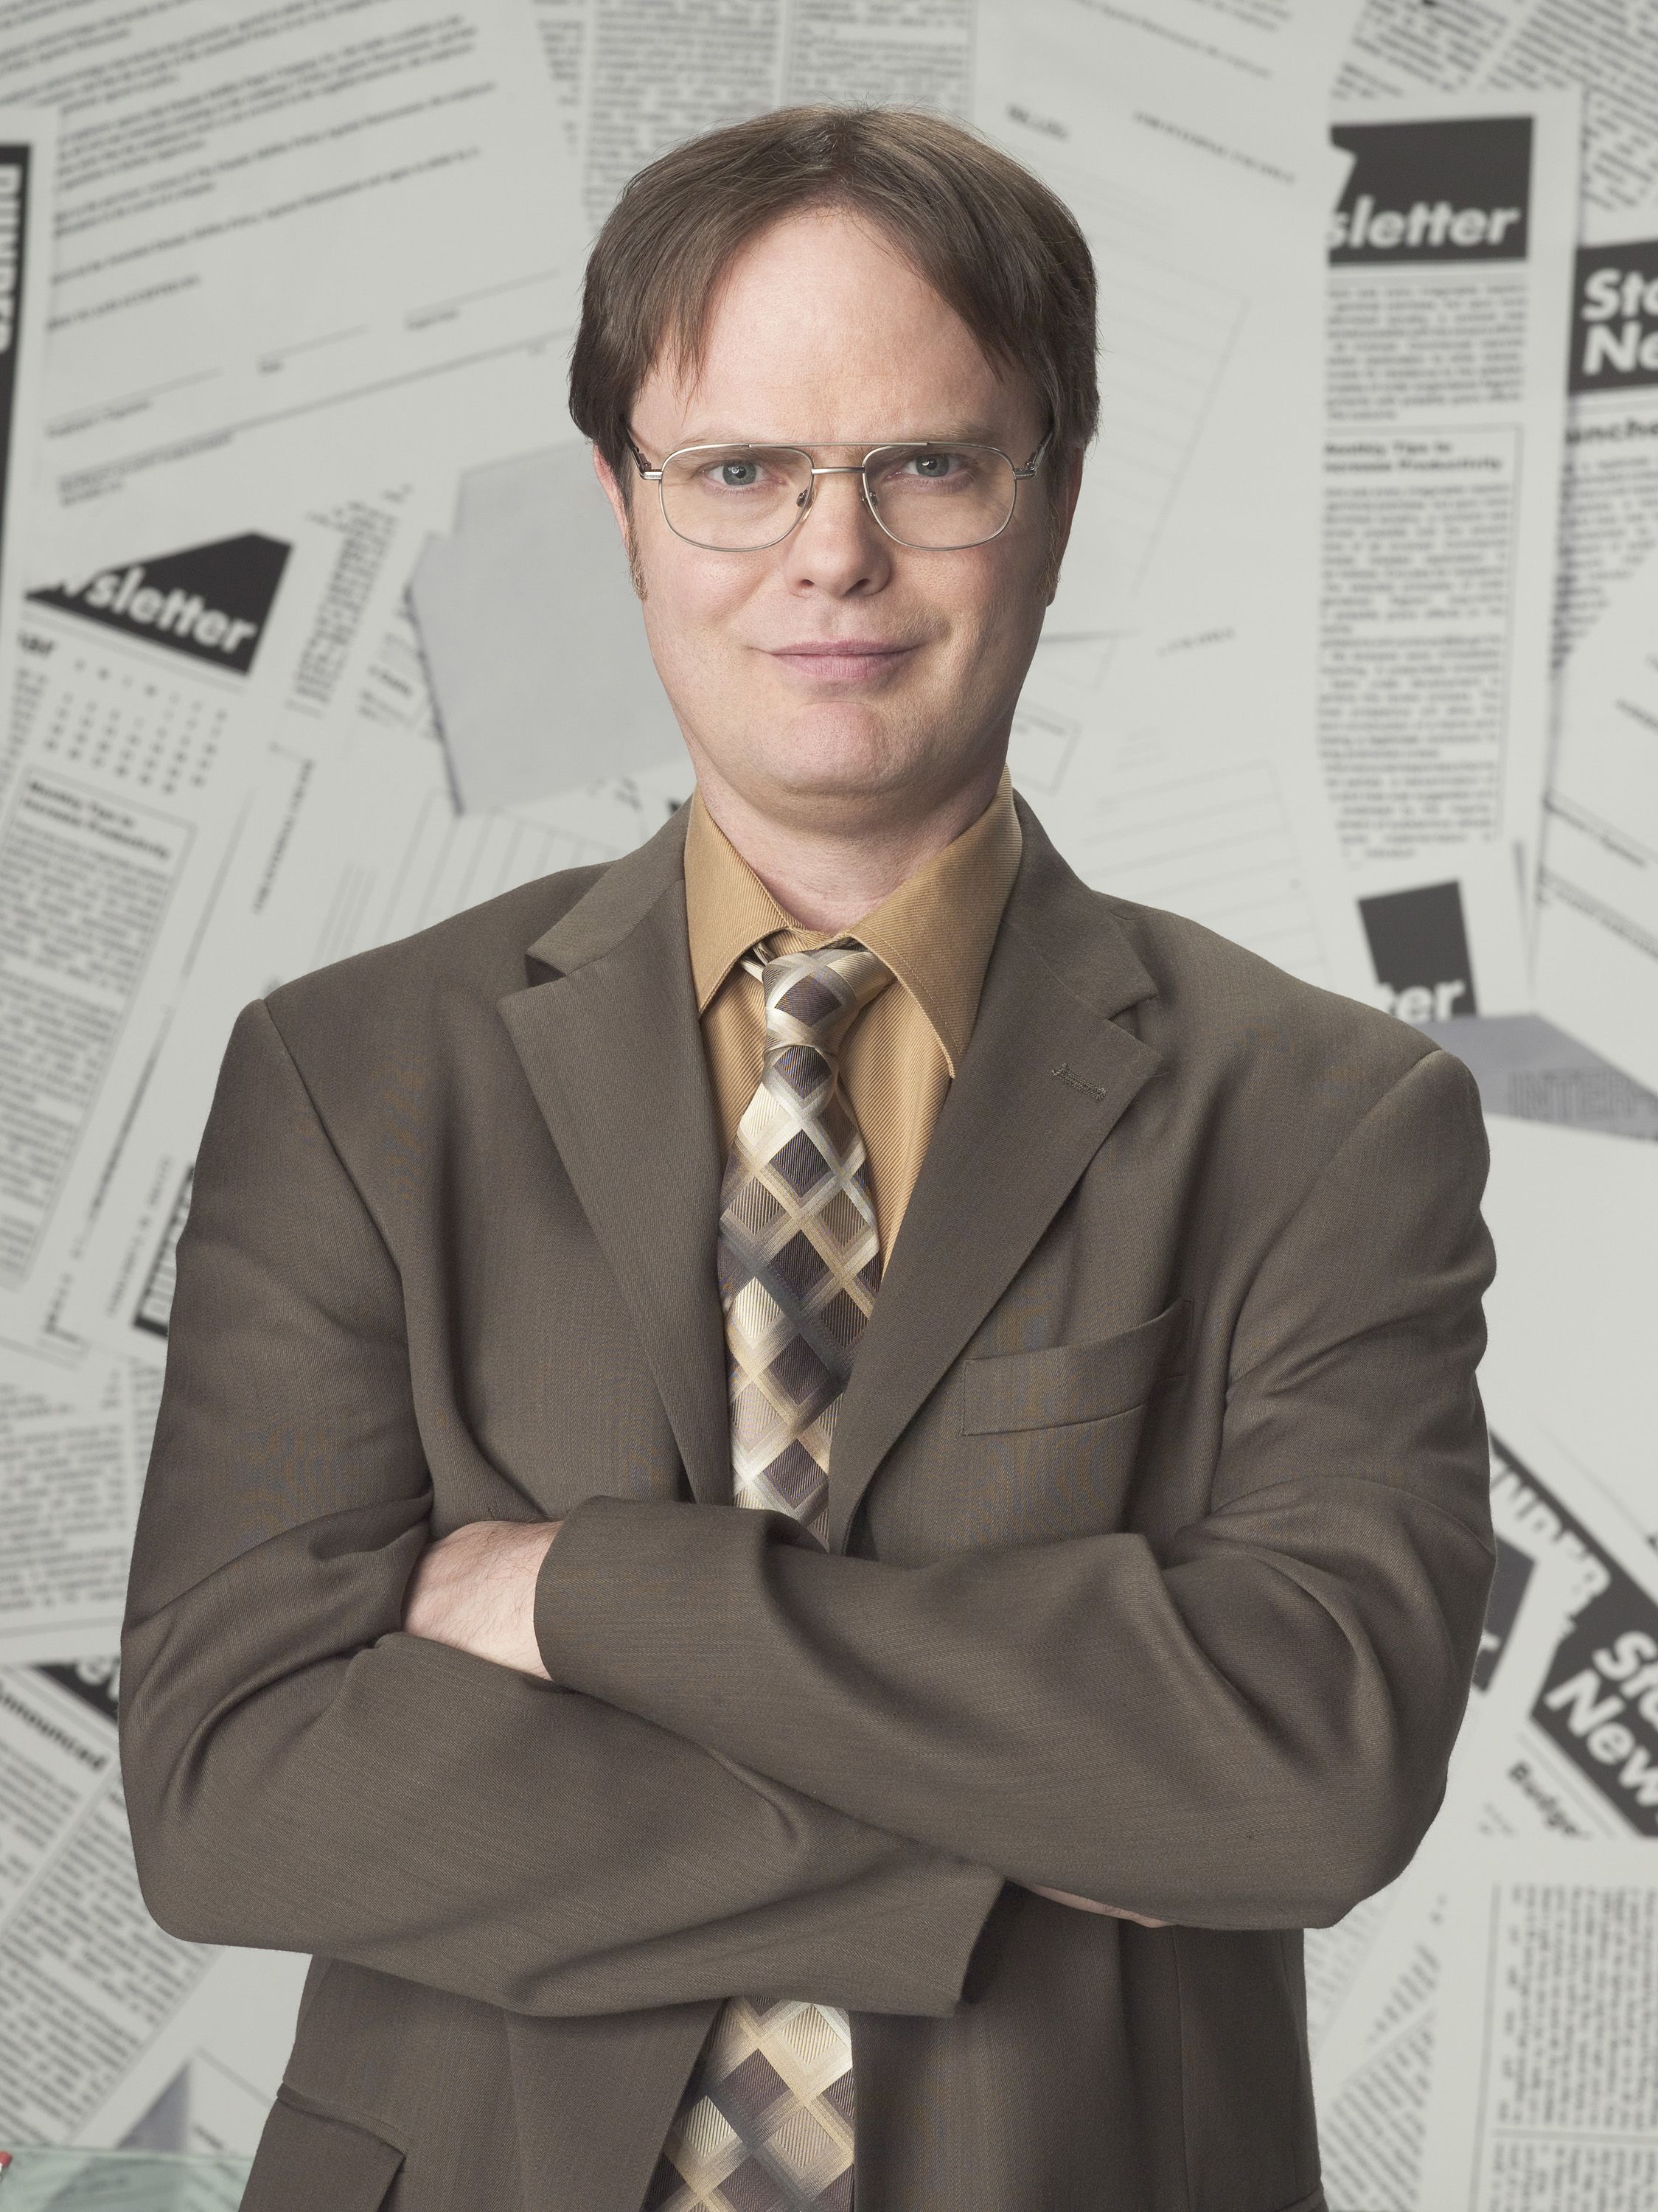 Dwight Schrute. Dunderpedia: The Office